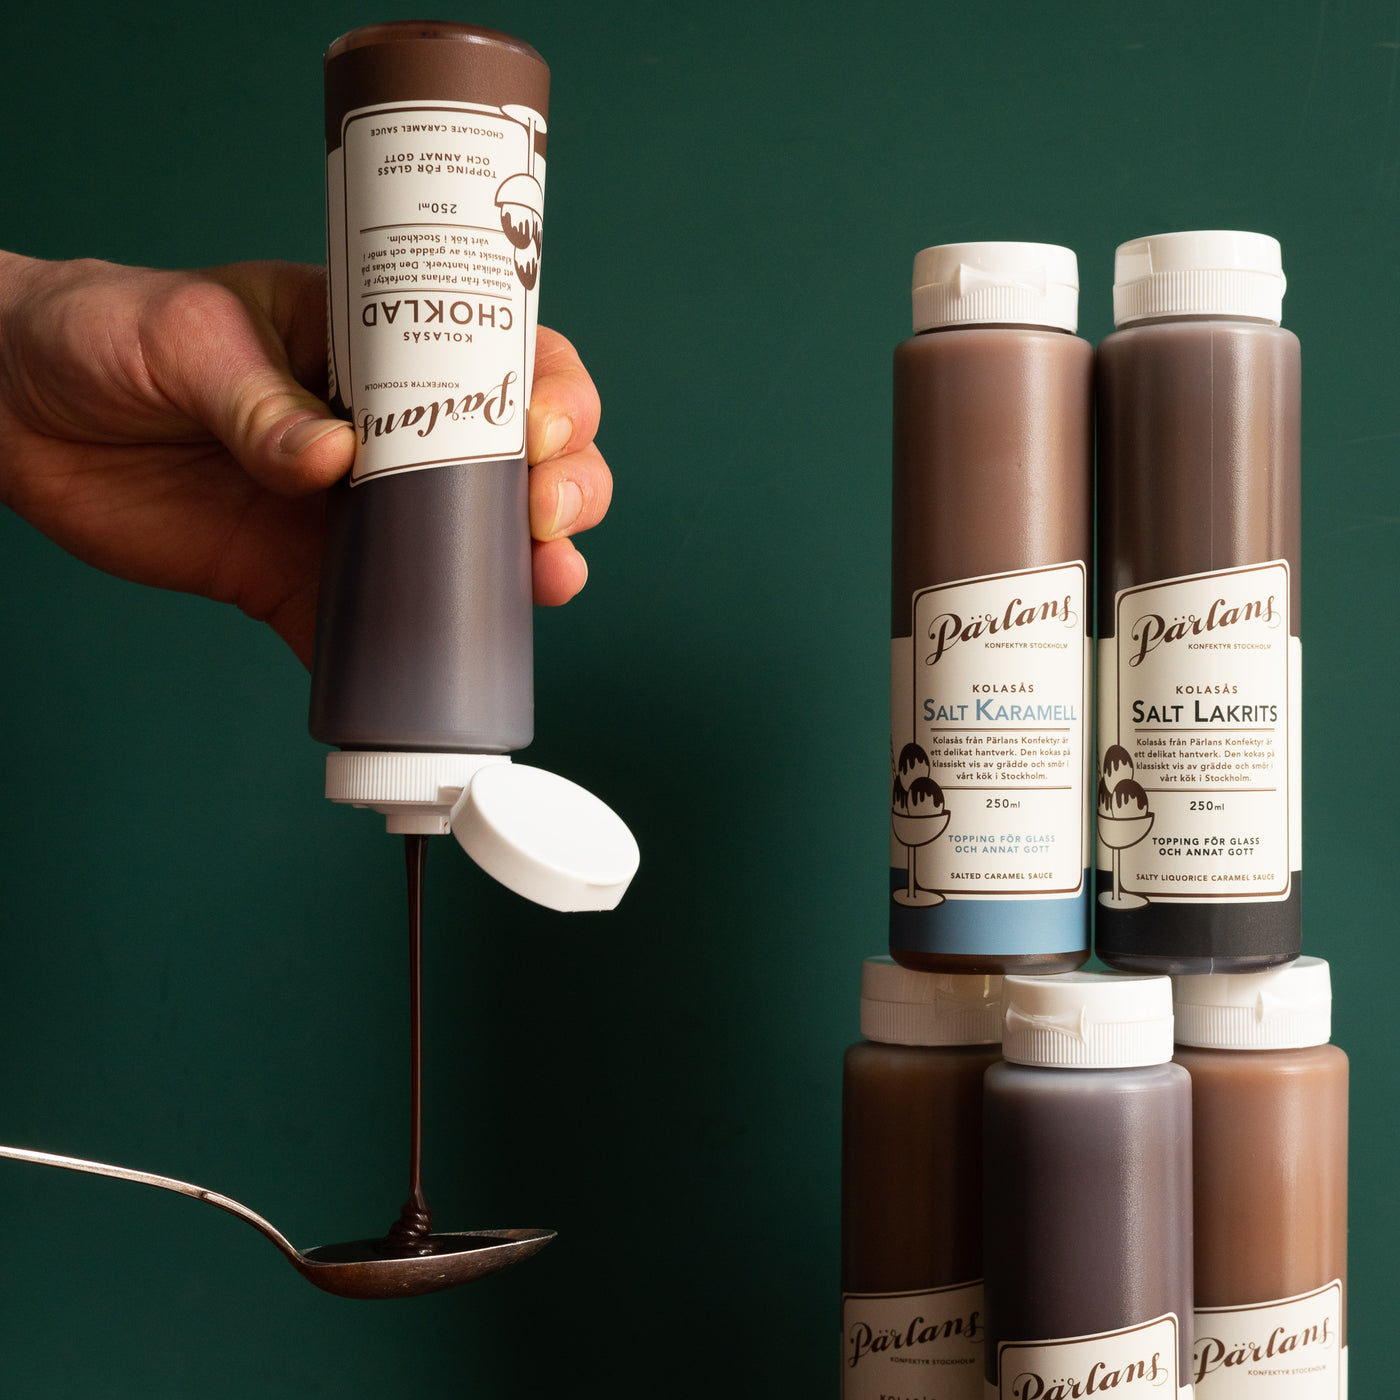 Our delicious caramel sauce in a handy squeeze bottle. Drizzle this glory over ice-cream or your other favourite desserts.<br><br>CHOCOLATE – This caramel sauce combines the best of both worlds - the rich darkness of chocolate and the lighter sweetness of caramel. Pure chocolatey goodness!